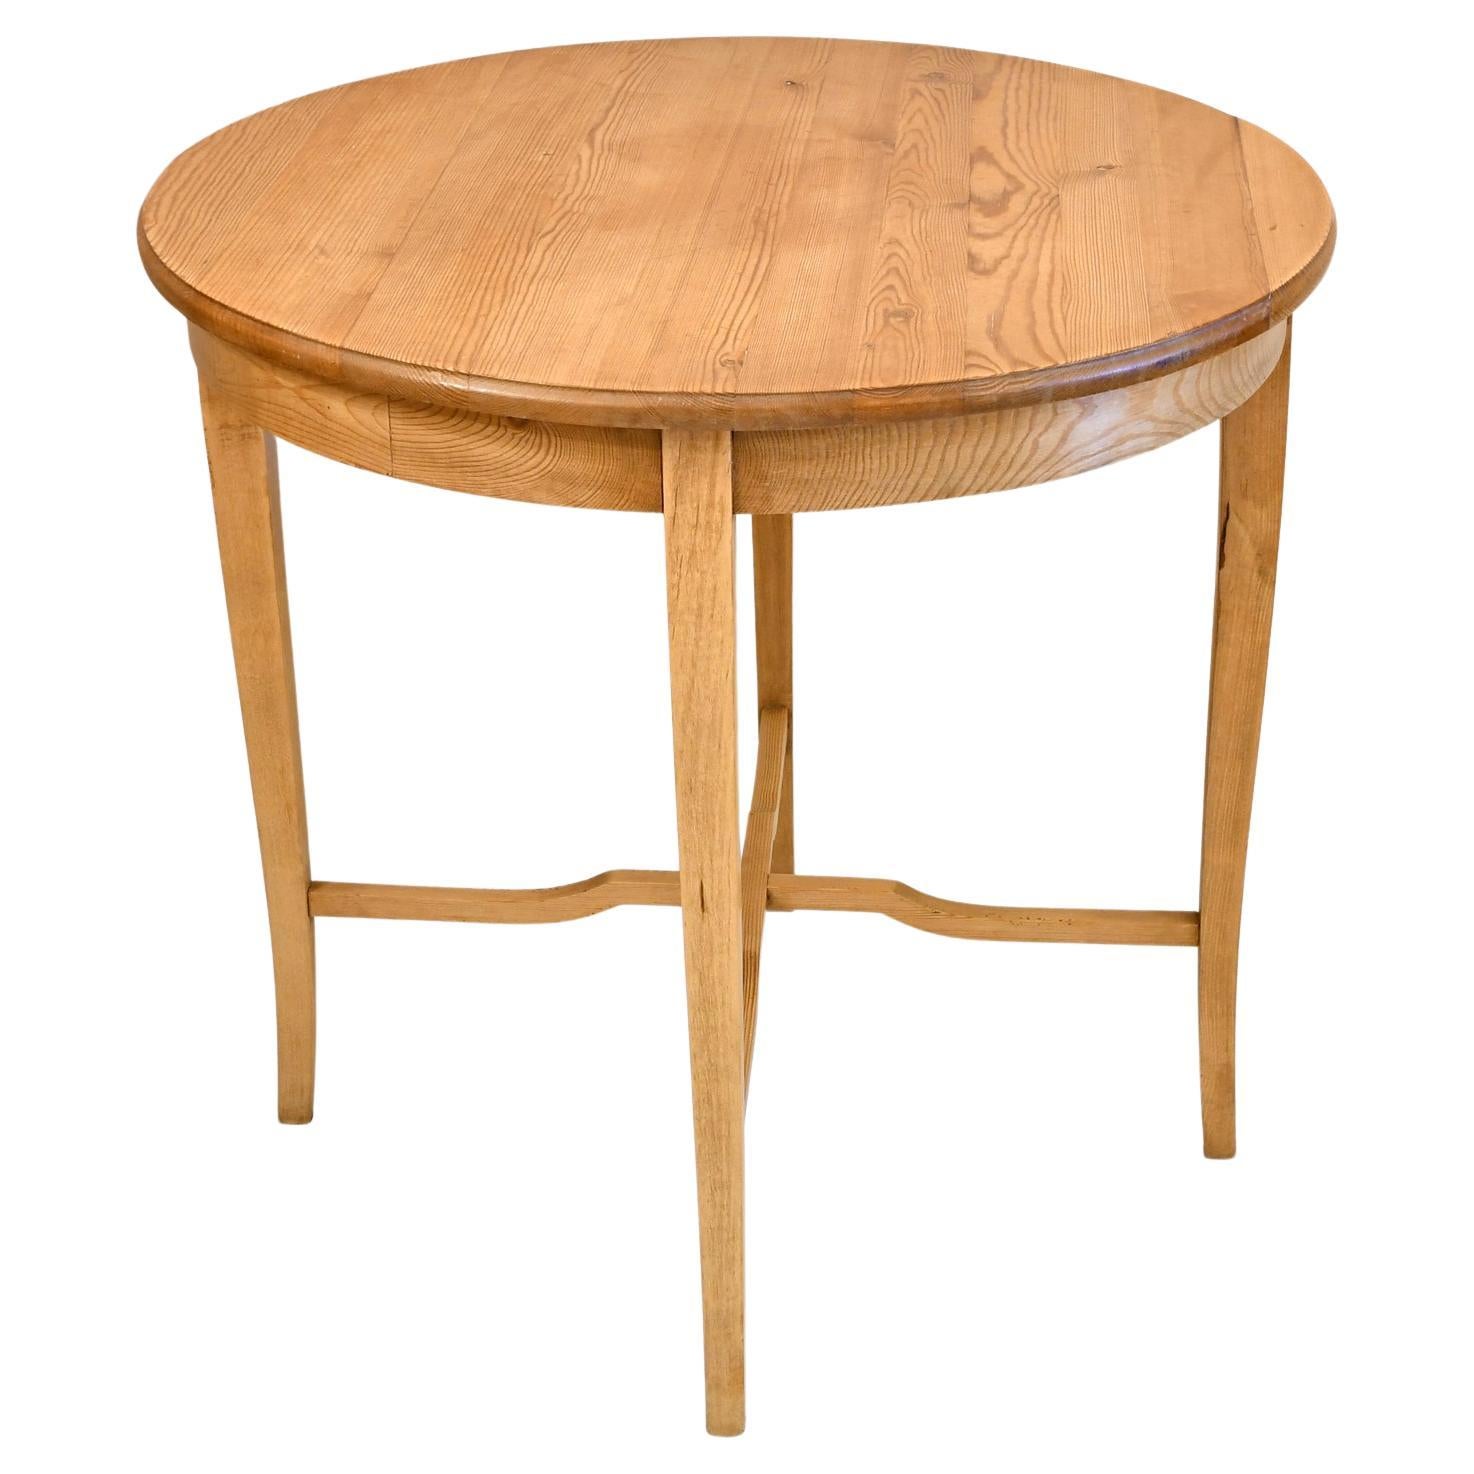 A very well-crafted antique European pine end table with round top over four square tapered legs that slightly curve & are joined by an 